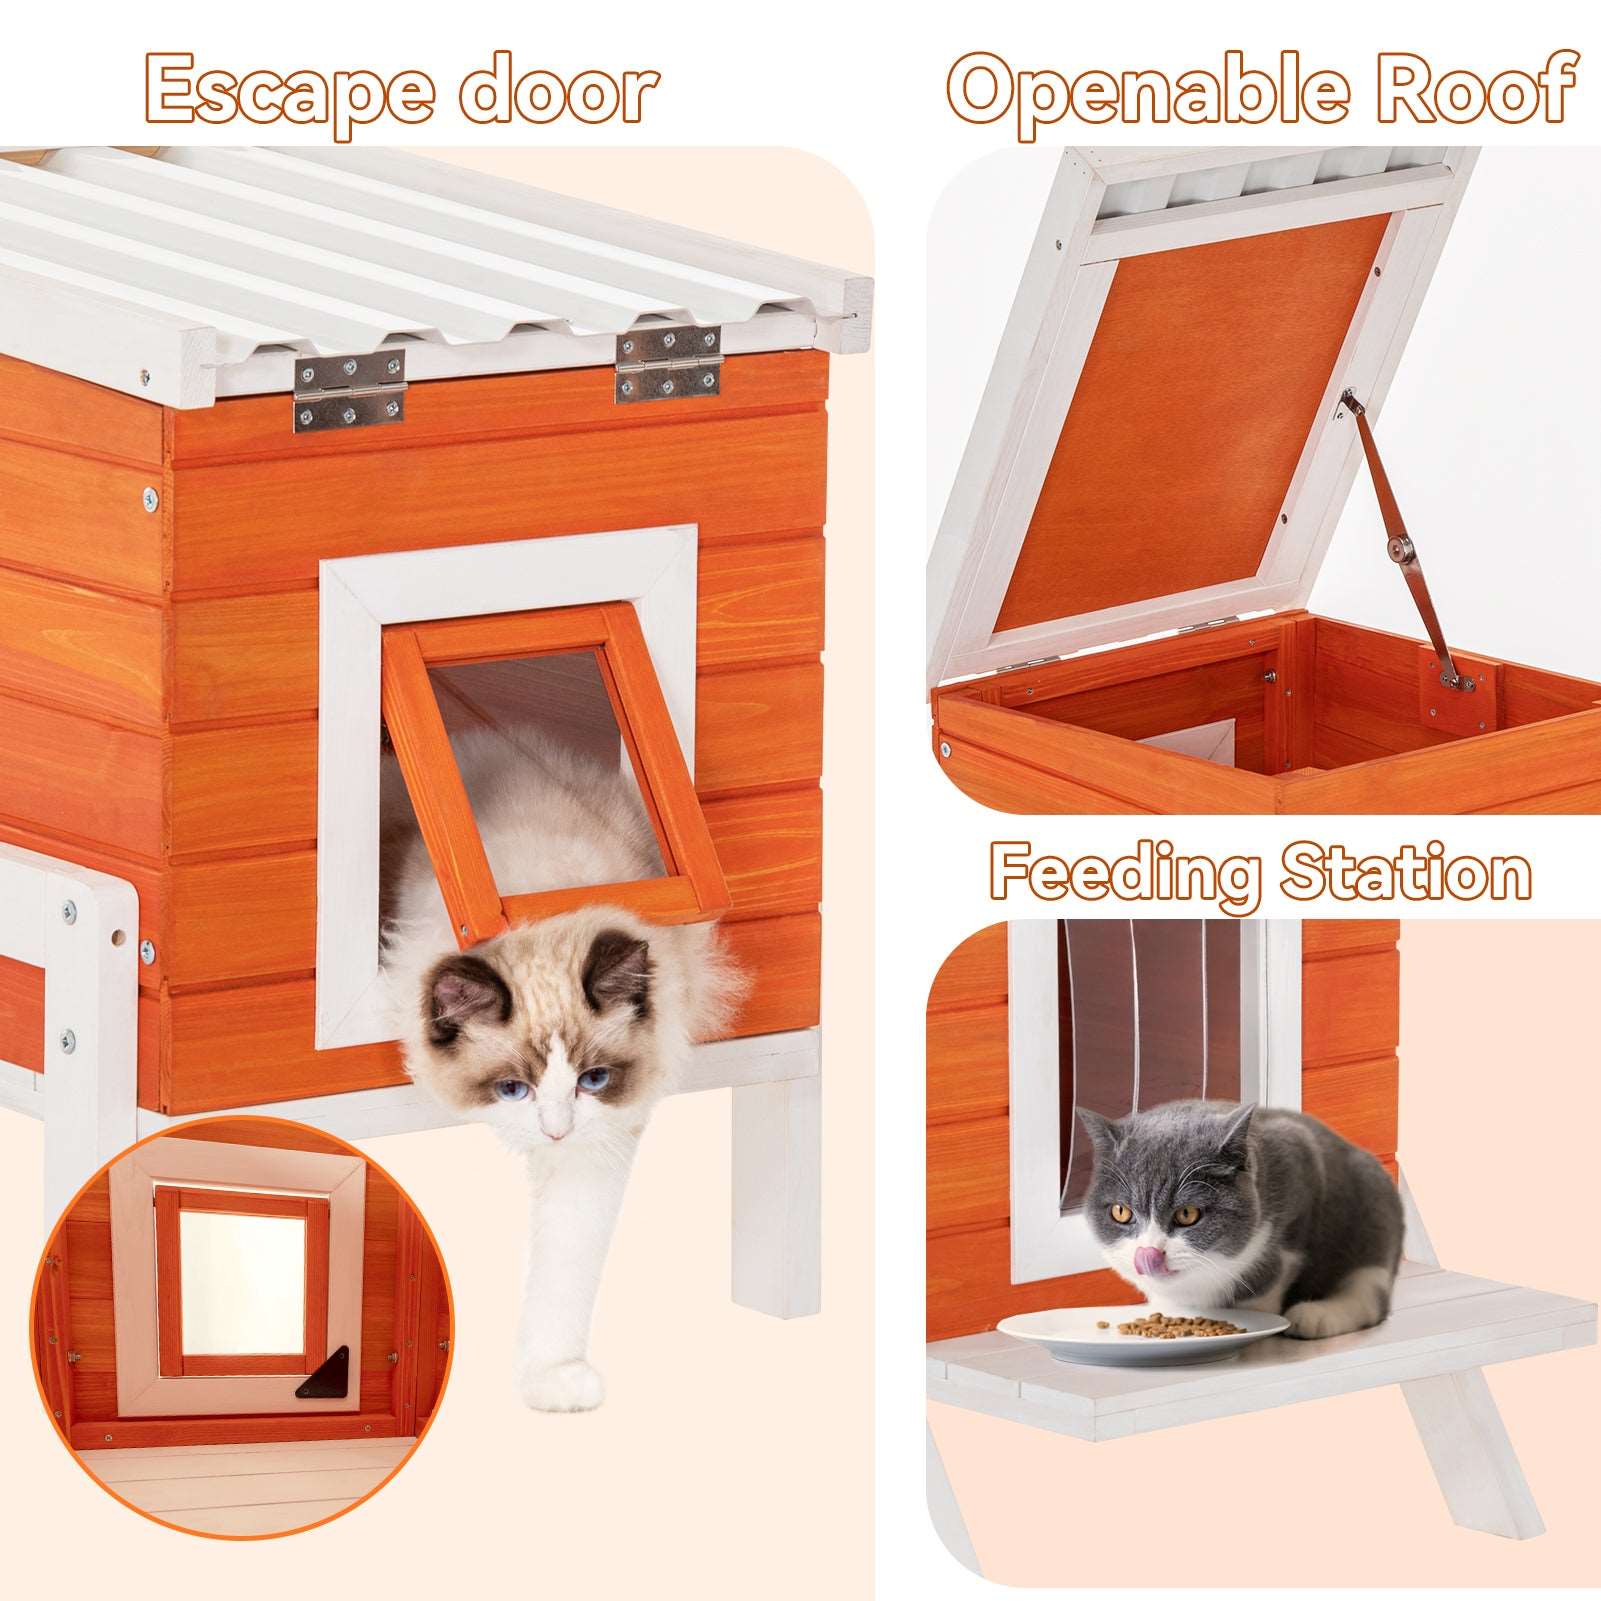 petsfit-cat-house-outdoor-insulated-high-feet-feeding-station-door-curtain-wood-outside-cat-house-bunny-rabbit-hutch-orange-05